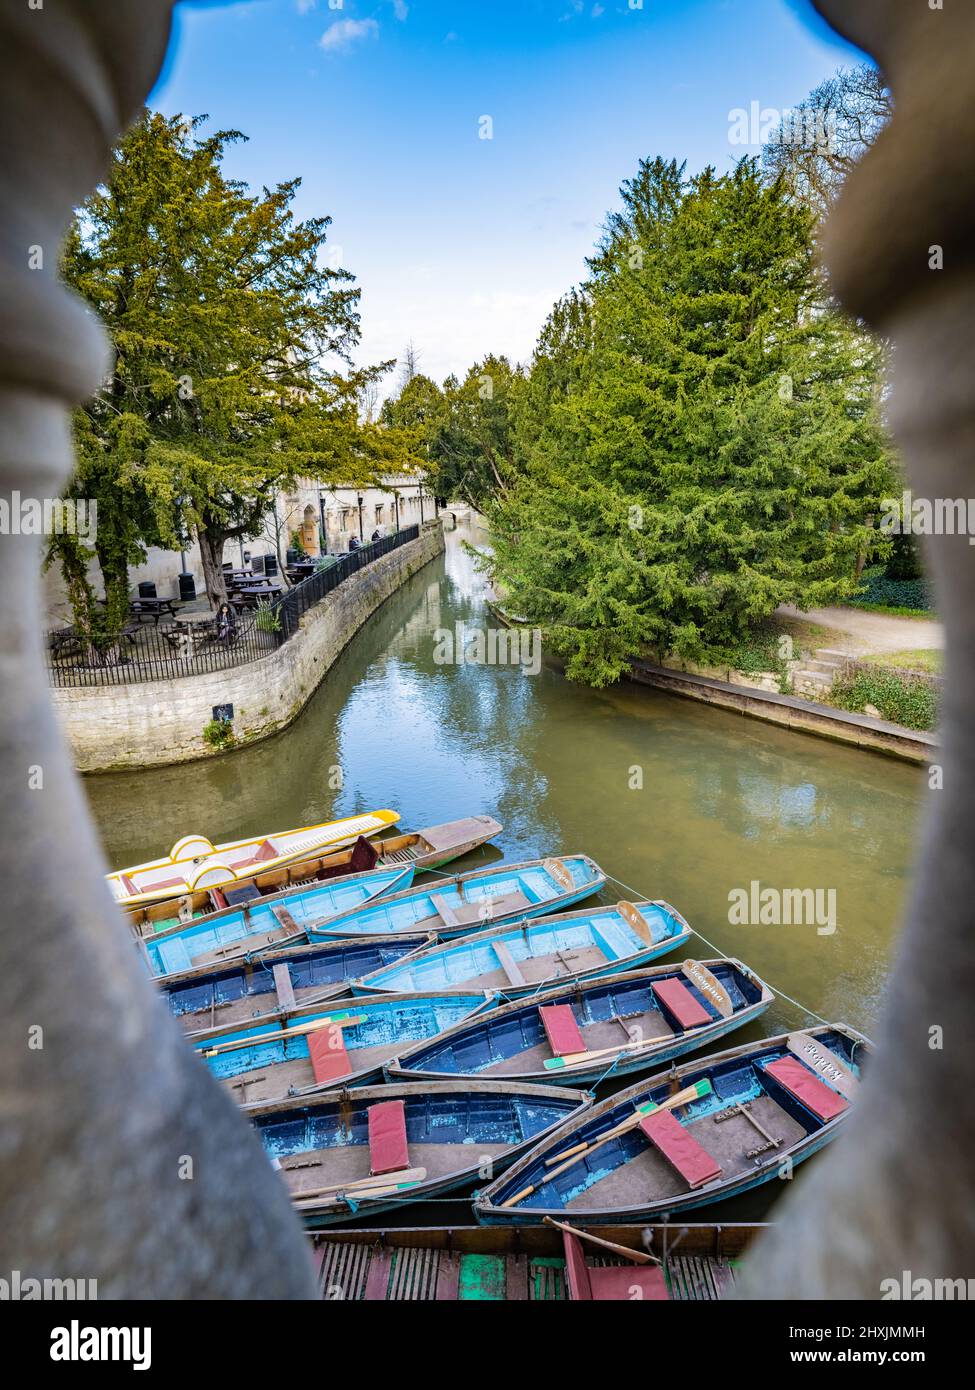 Oxford punting, a business in Oxford that offers the traditional experience of punting down the River Cherwell. The River Cherwell is a tributary of t Stock Photo